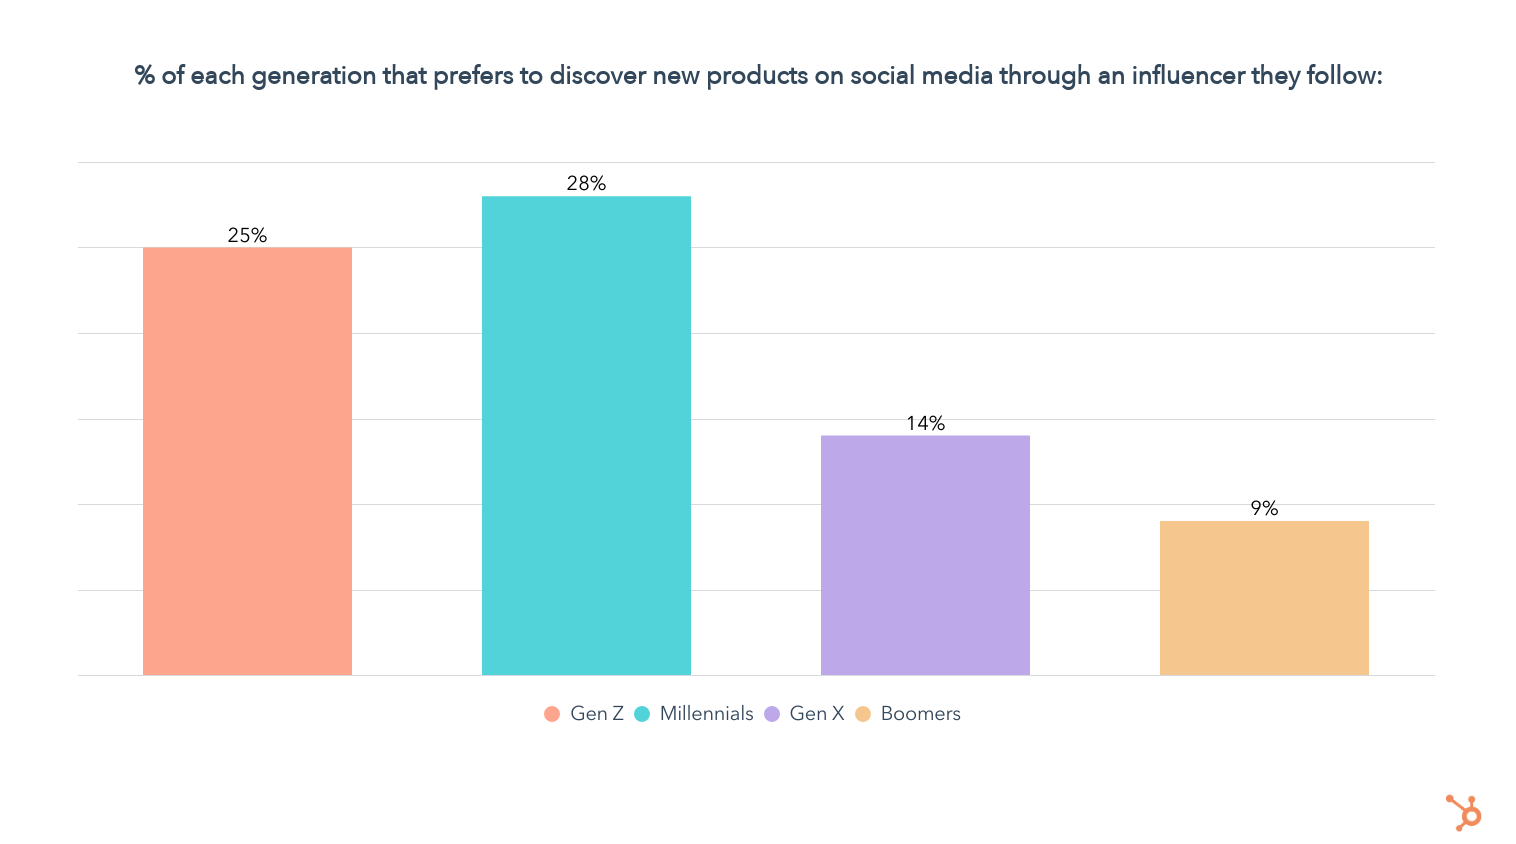 what portion of generation prefers to discover products on social media